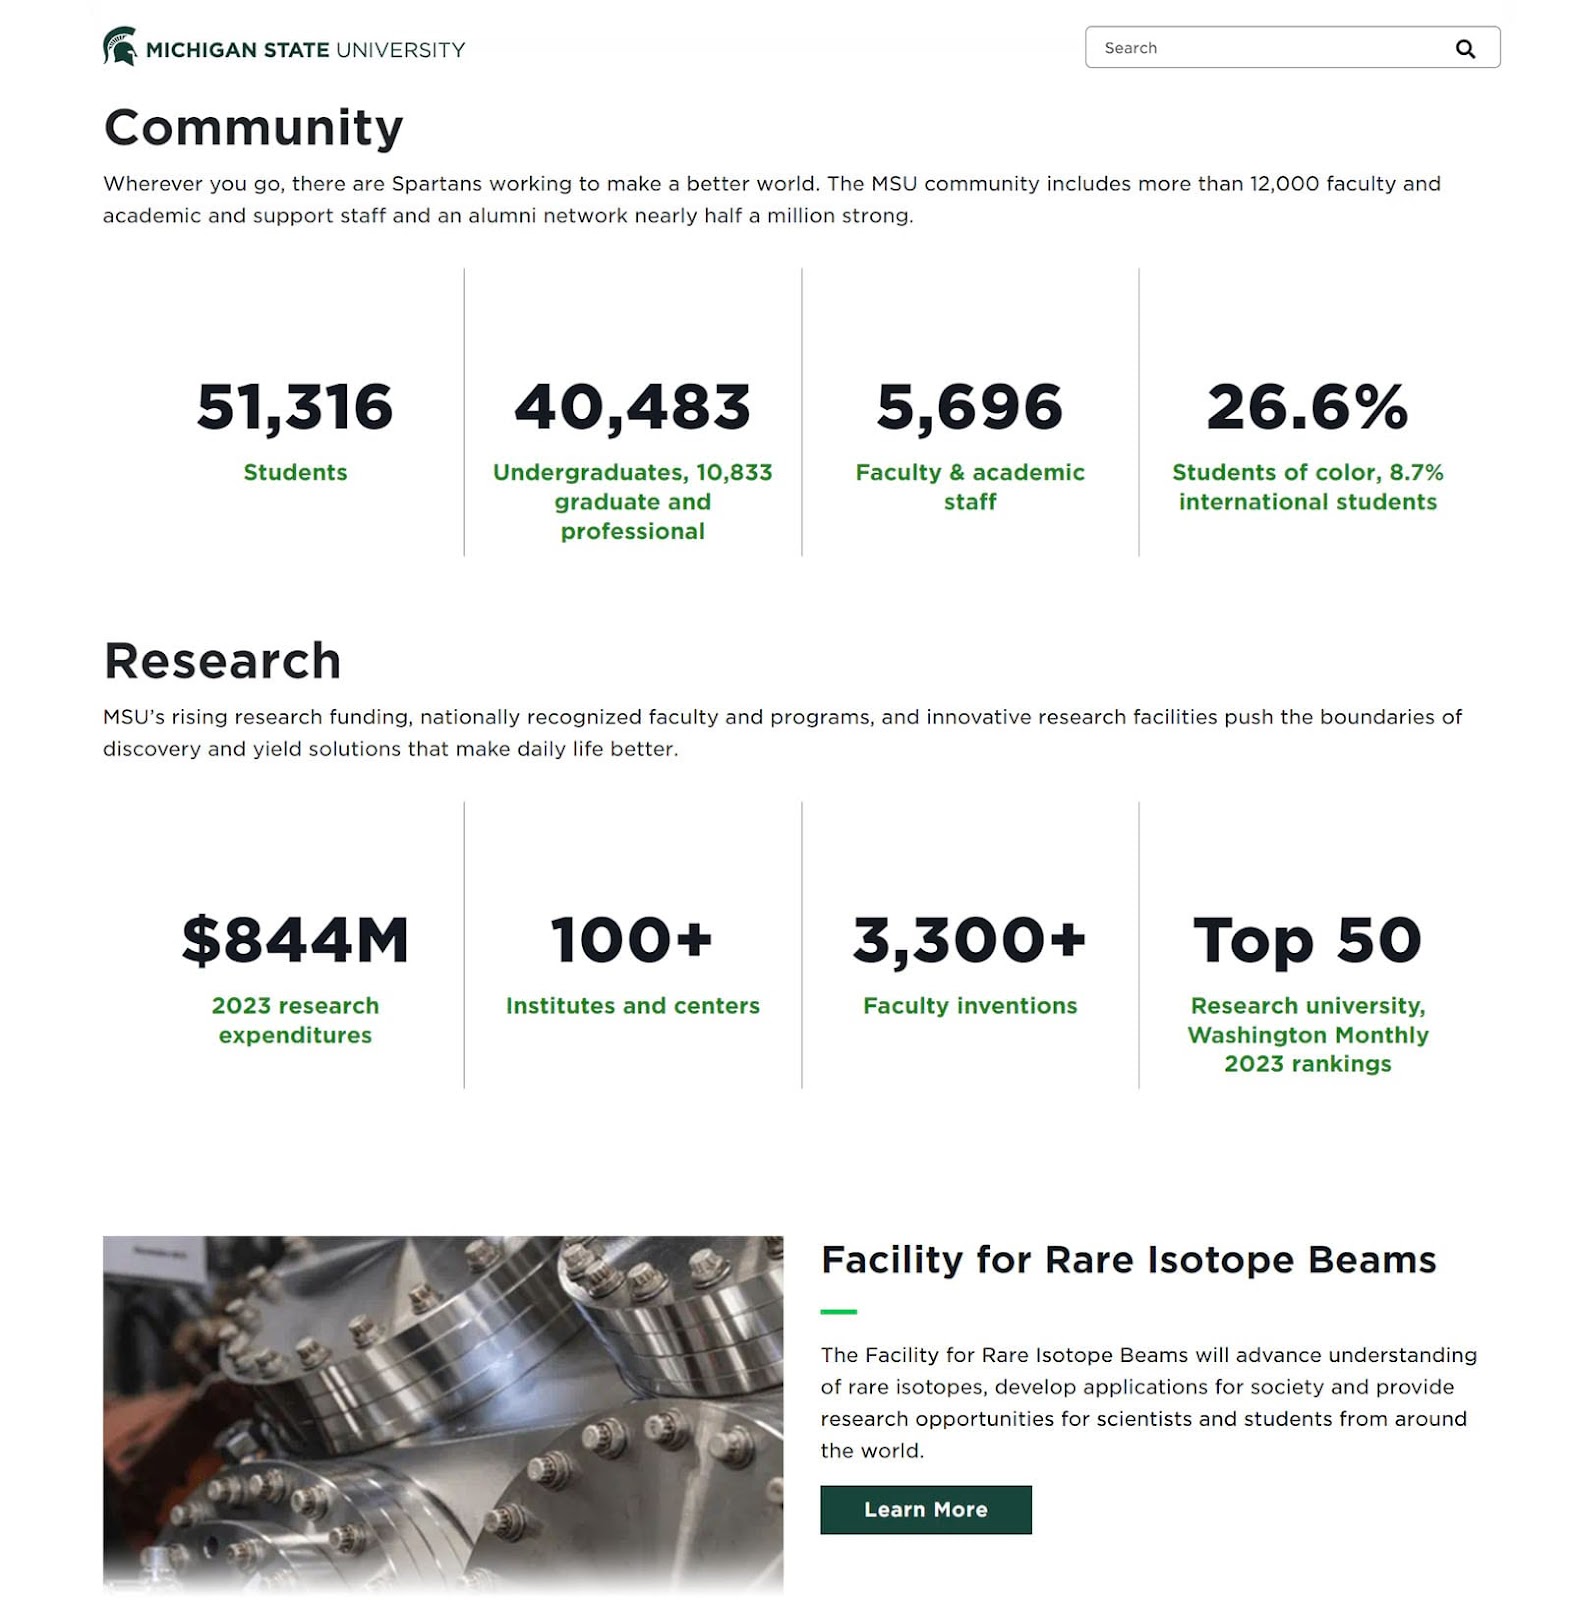 Michigan State University page sharing different community and research statistics.